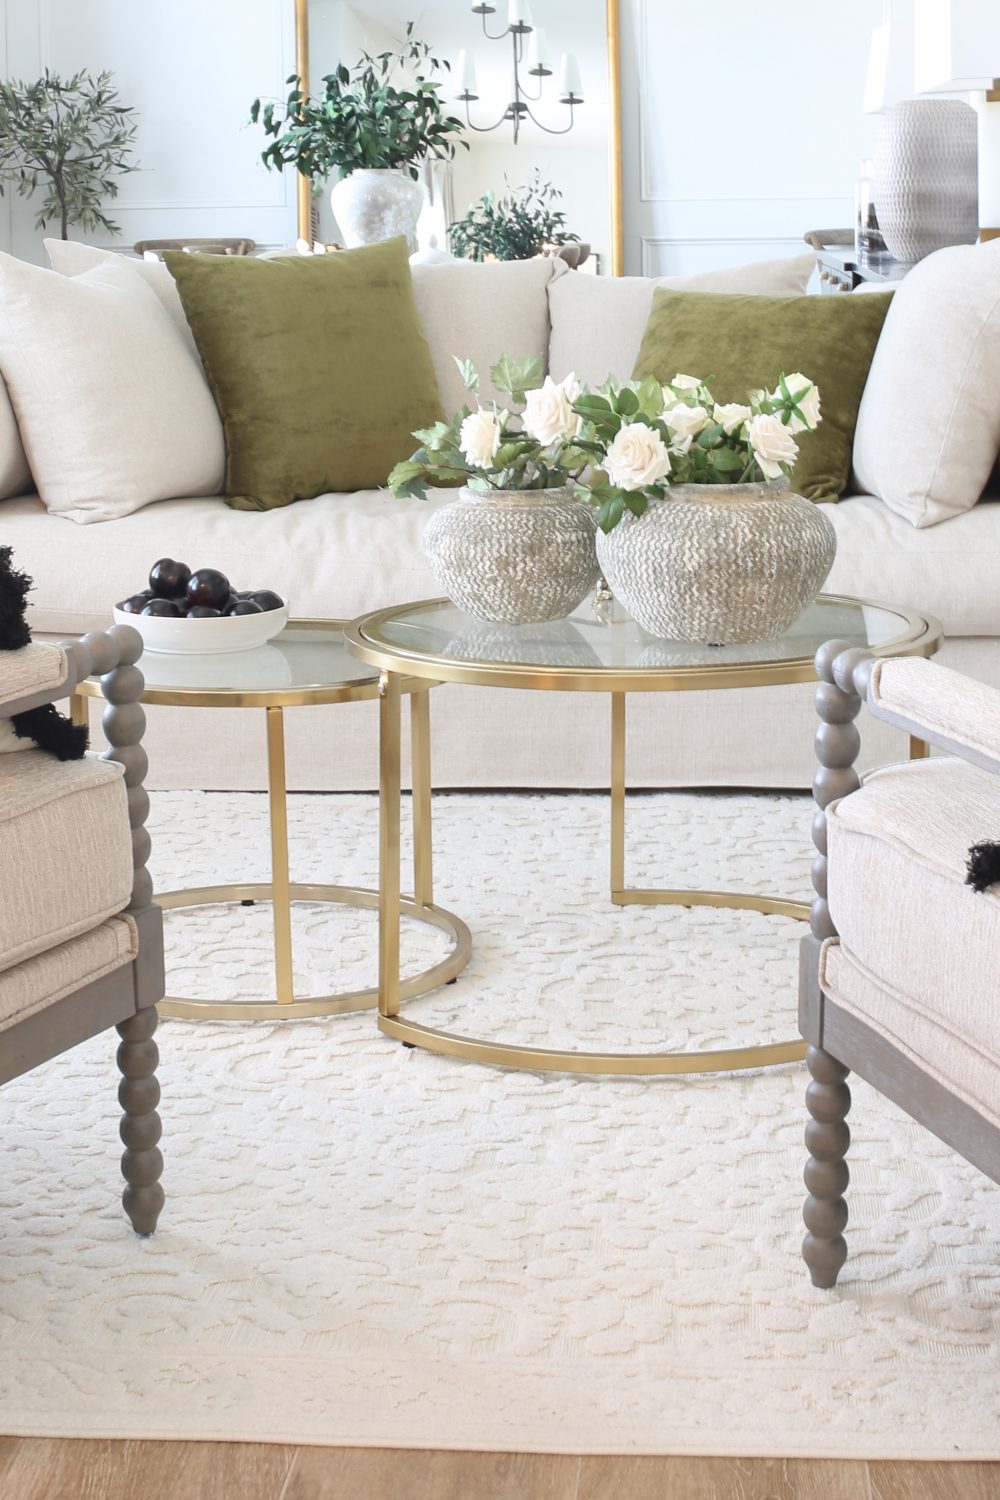 White living room with gold nesting tables. The rug is also white.